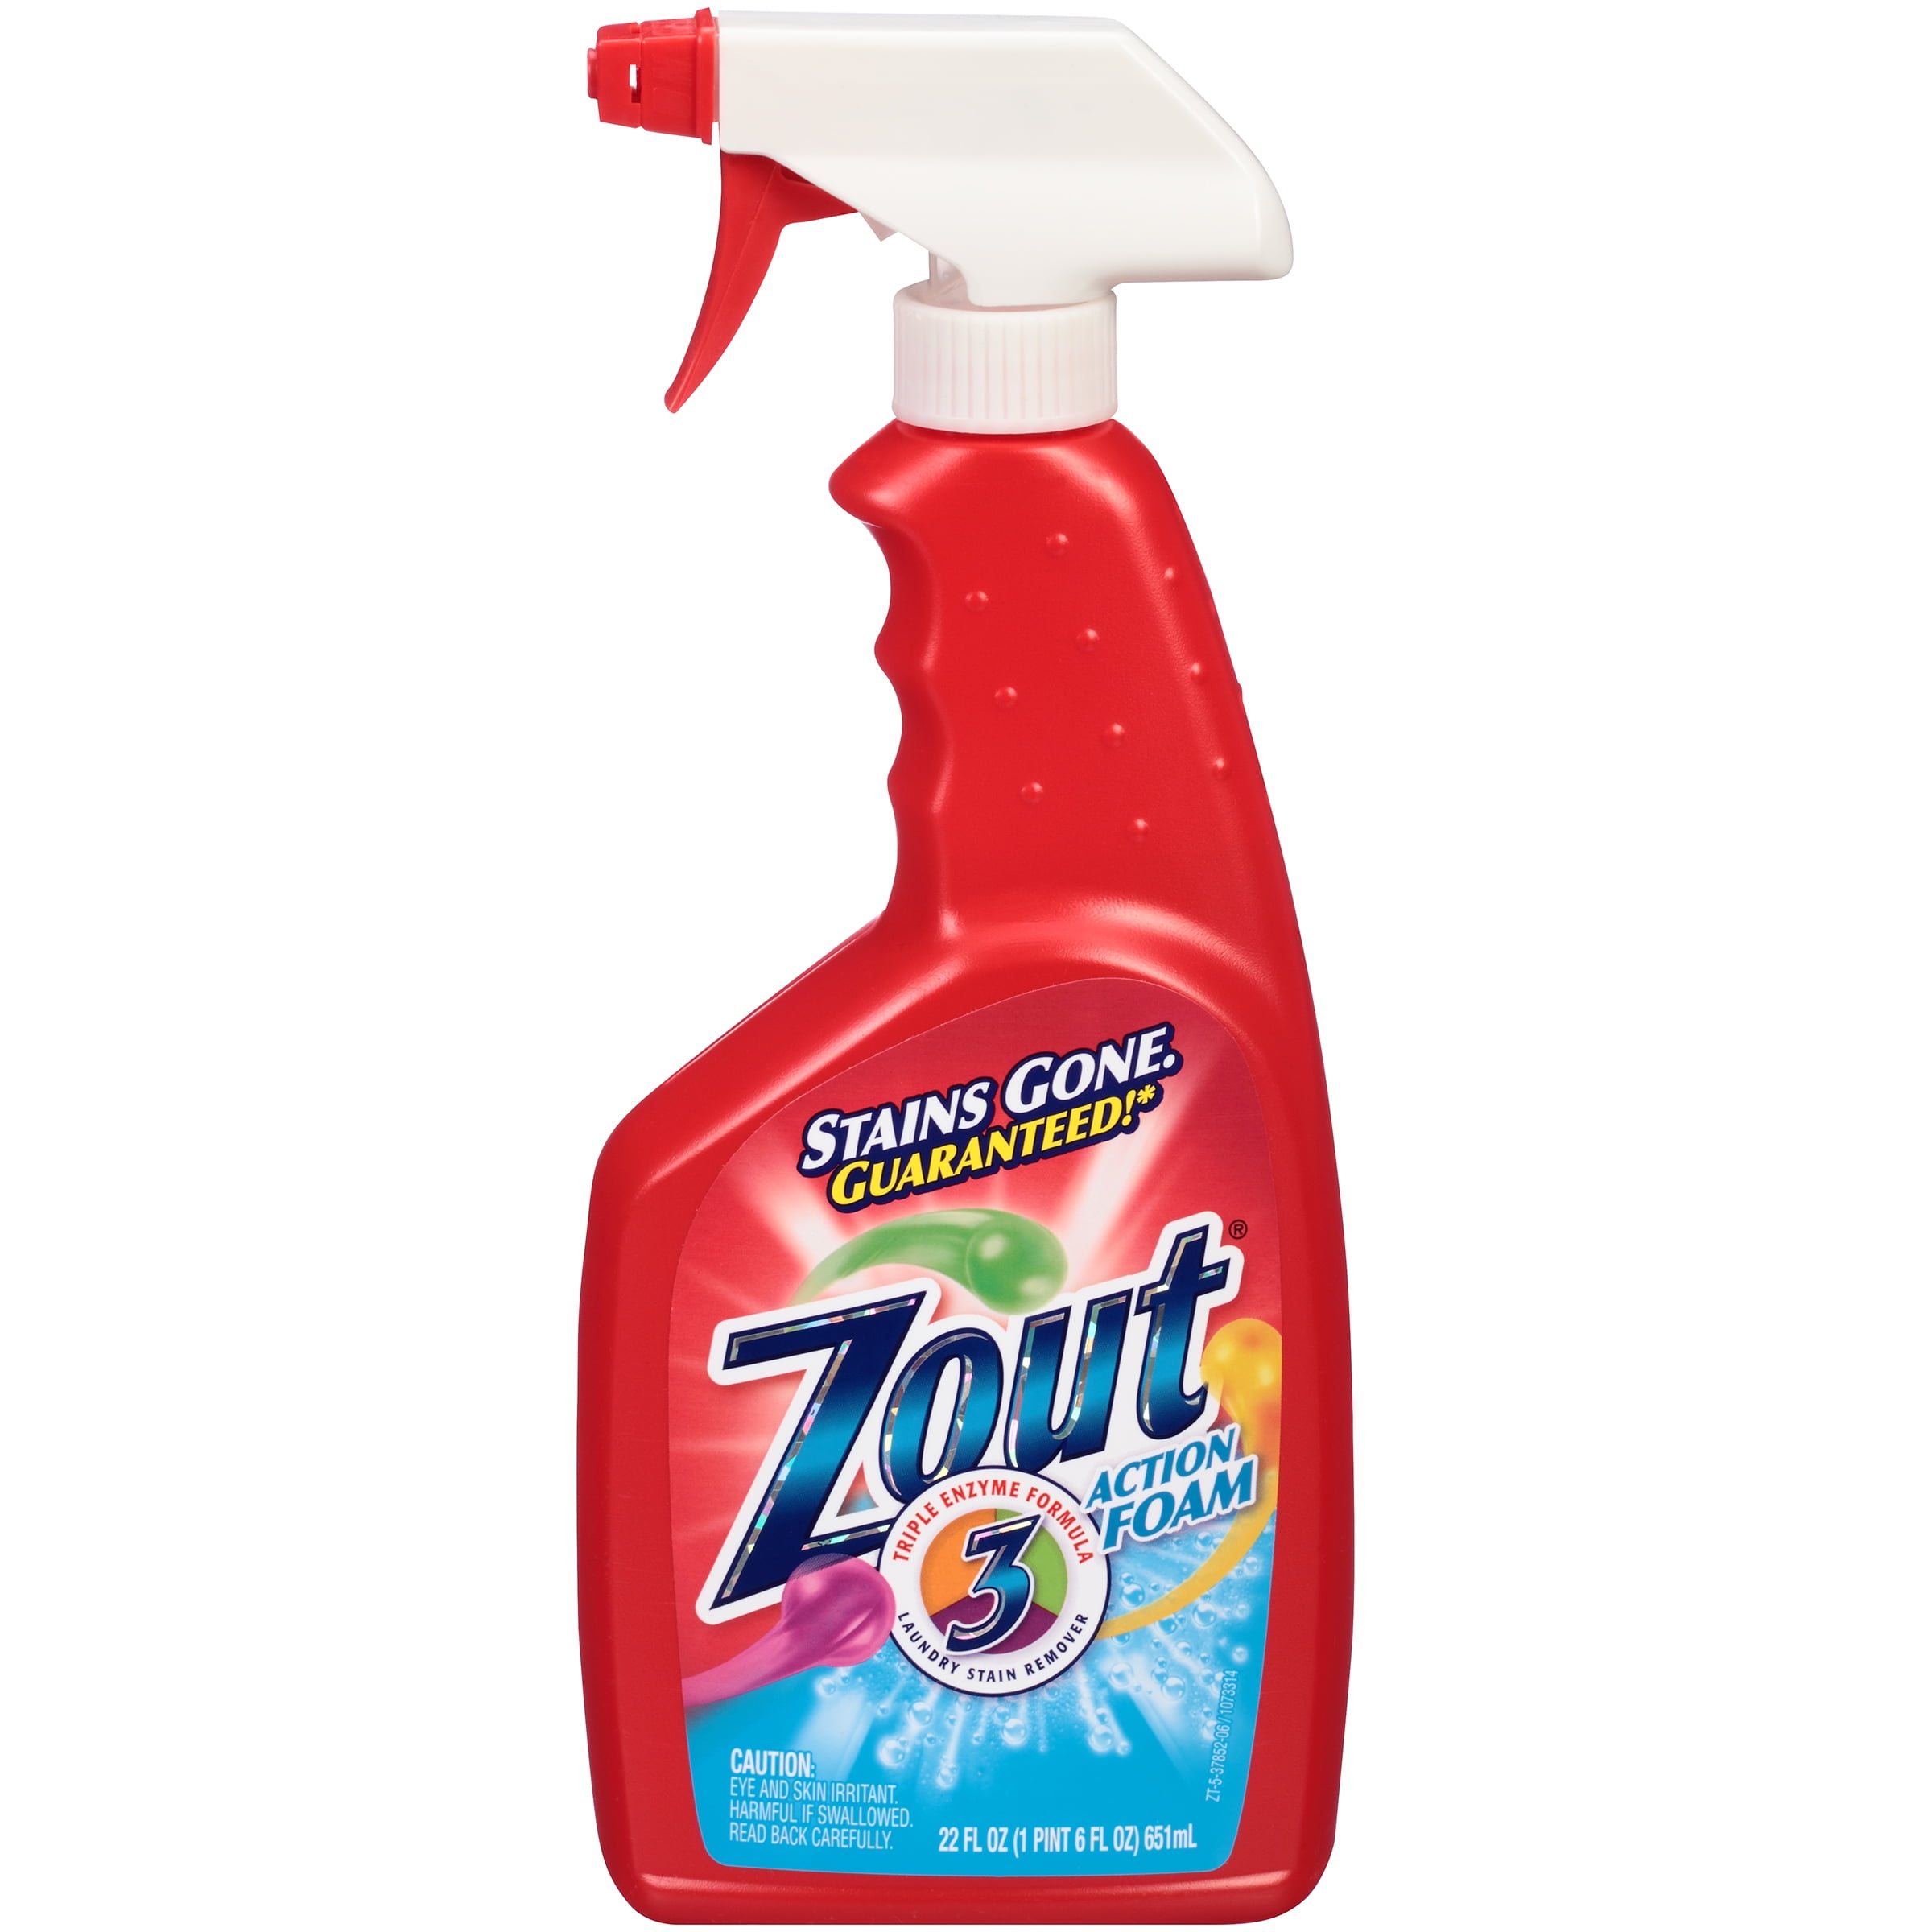 Shout Advanced Laundry Stain Remover Gel, Breaks Down 100+ Types of Tough  Stains - 22oz Spray